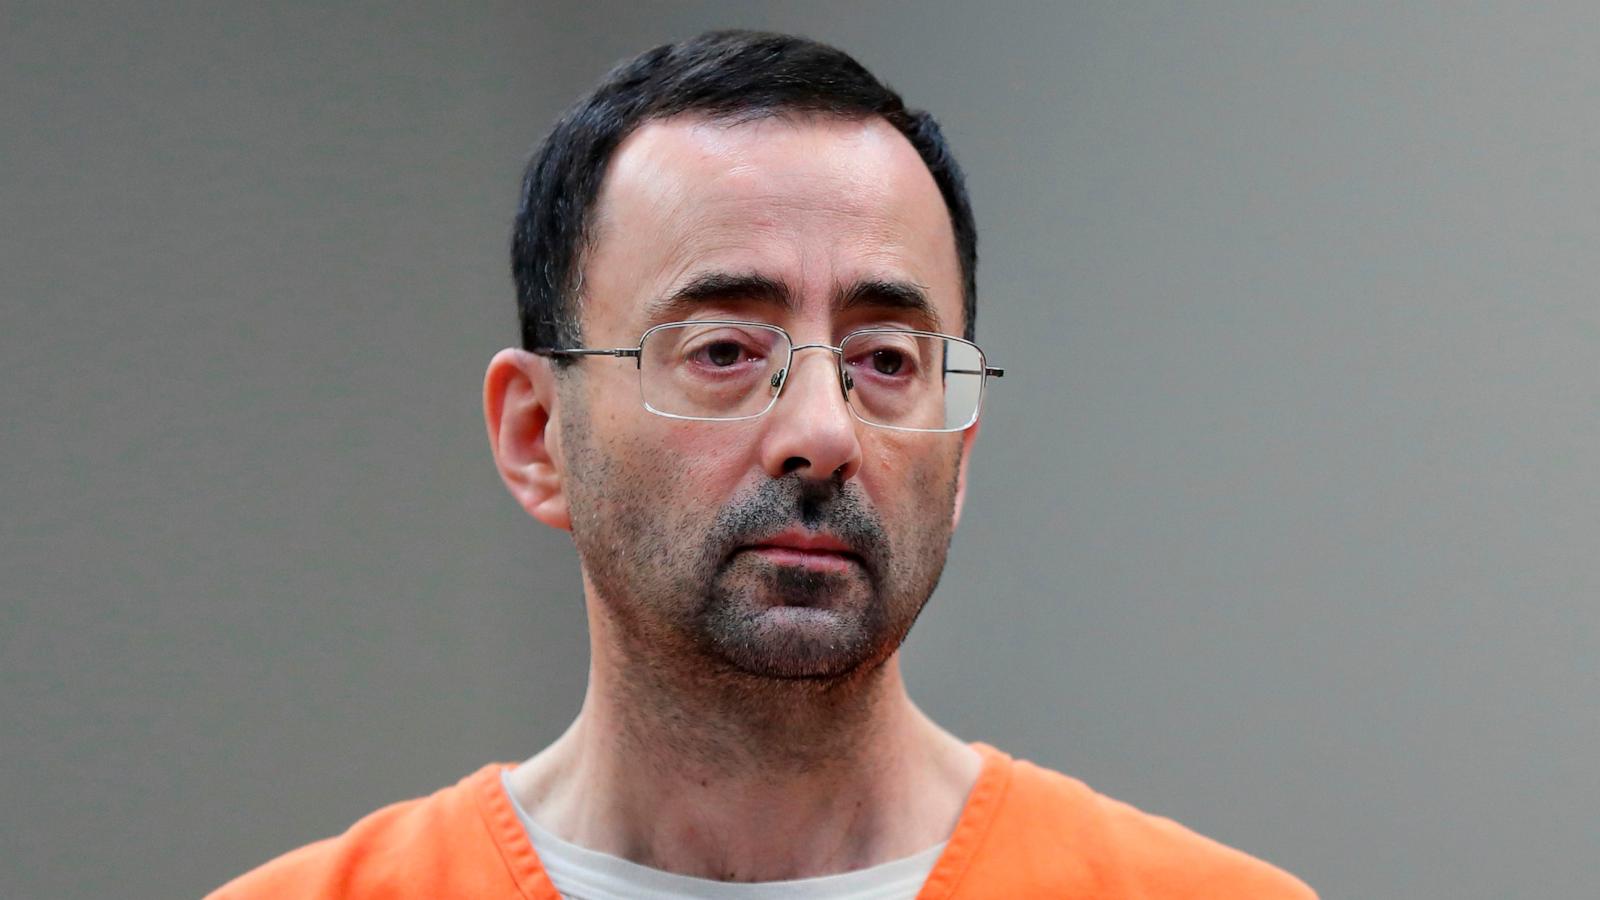 doj in final stages of settlement negotiations with larry nassar victims: sources